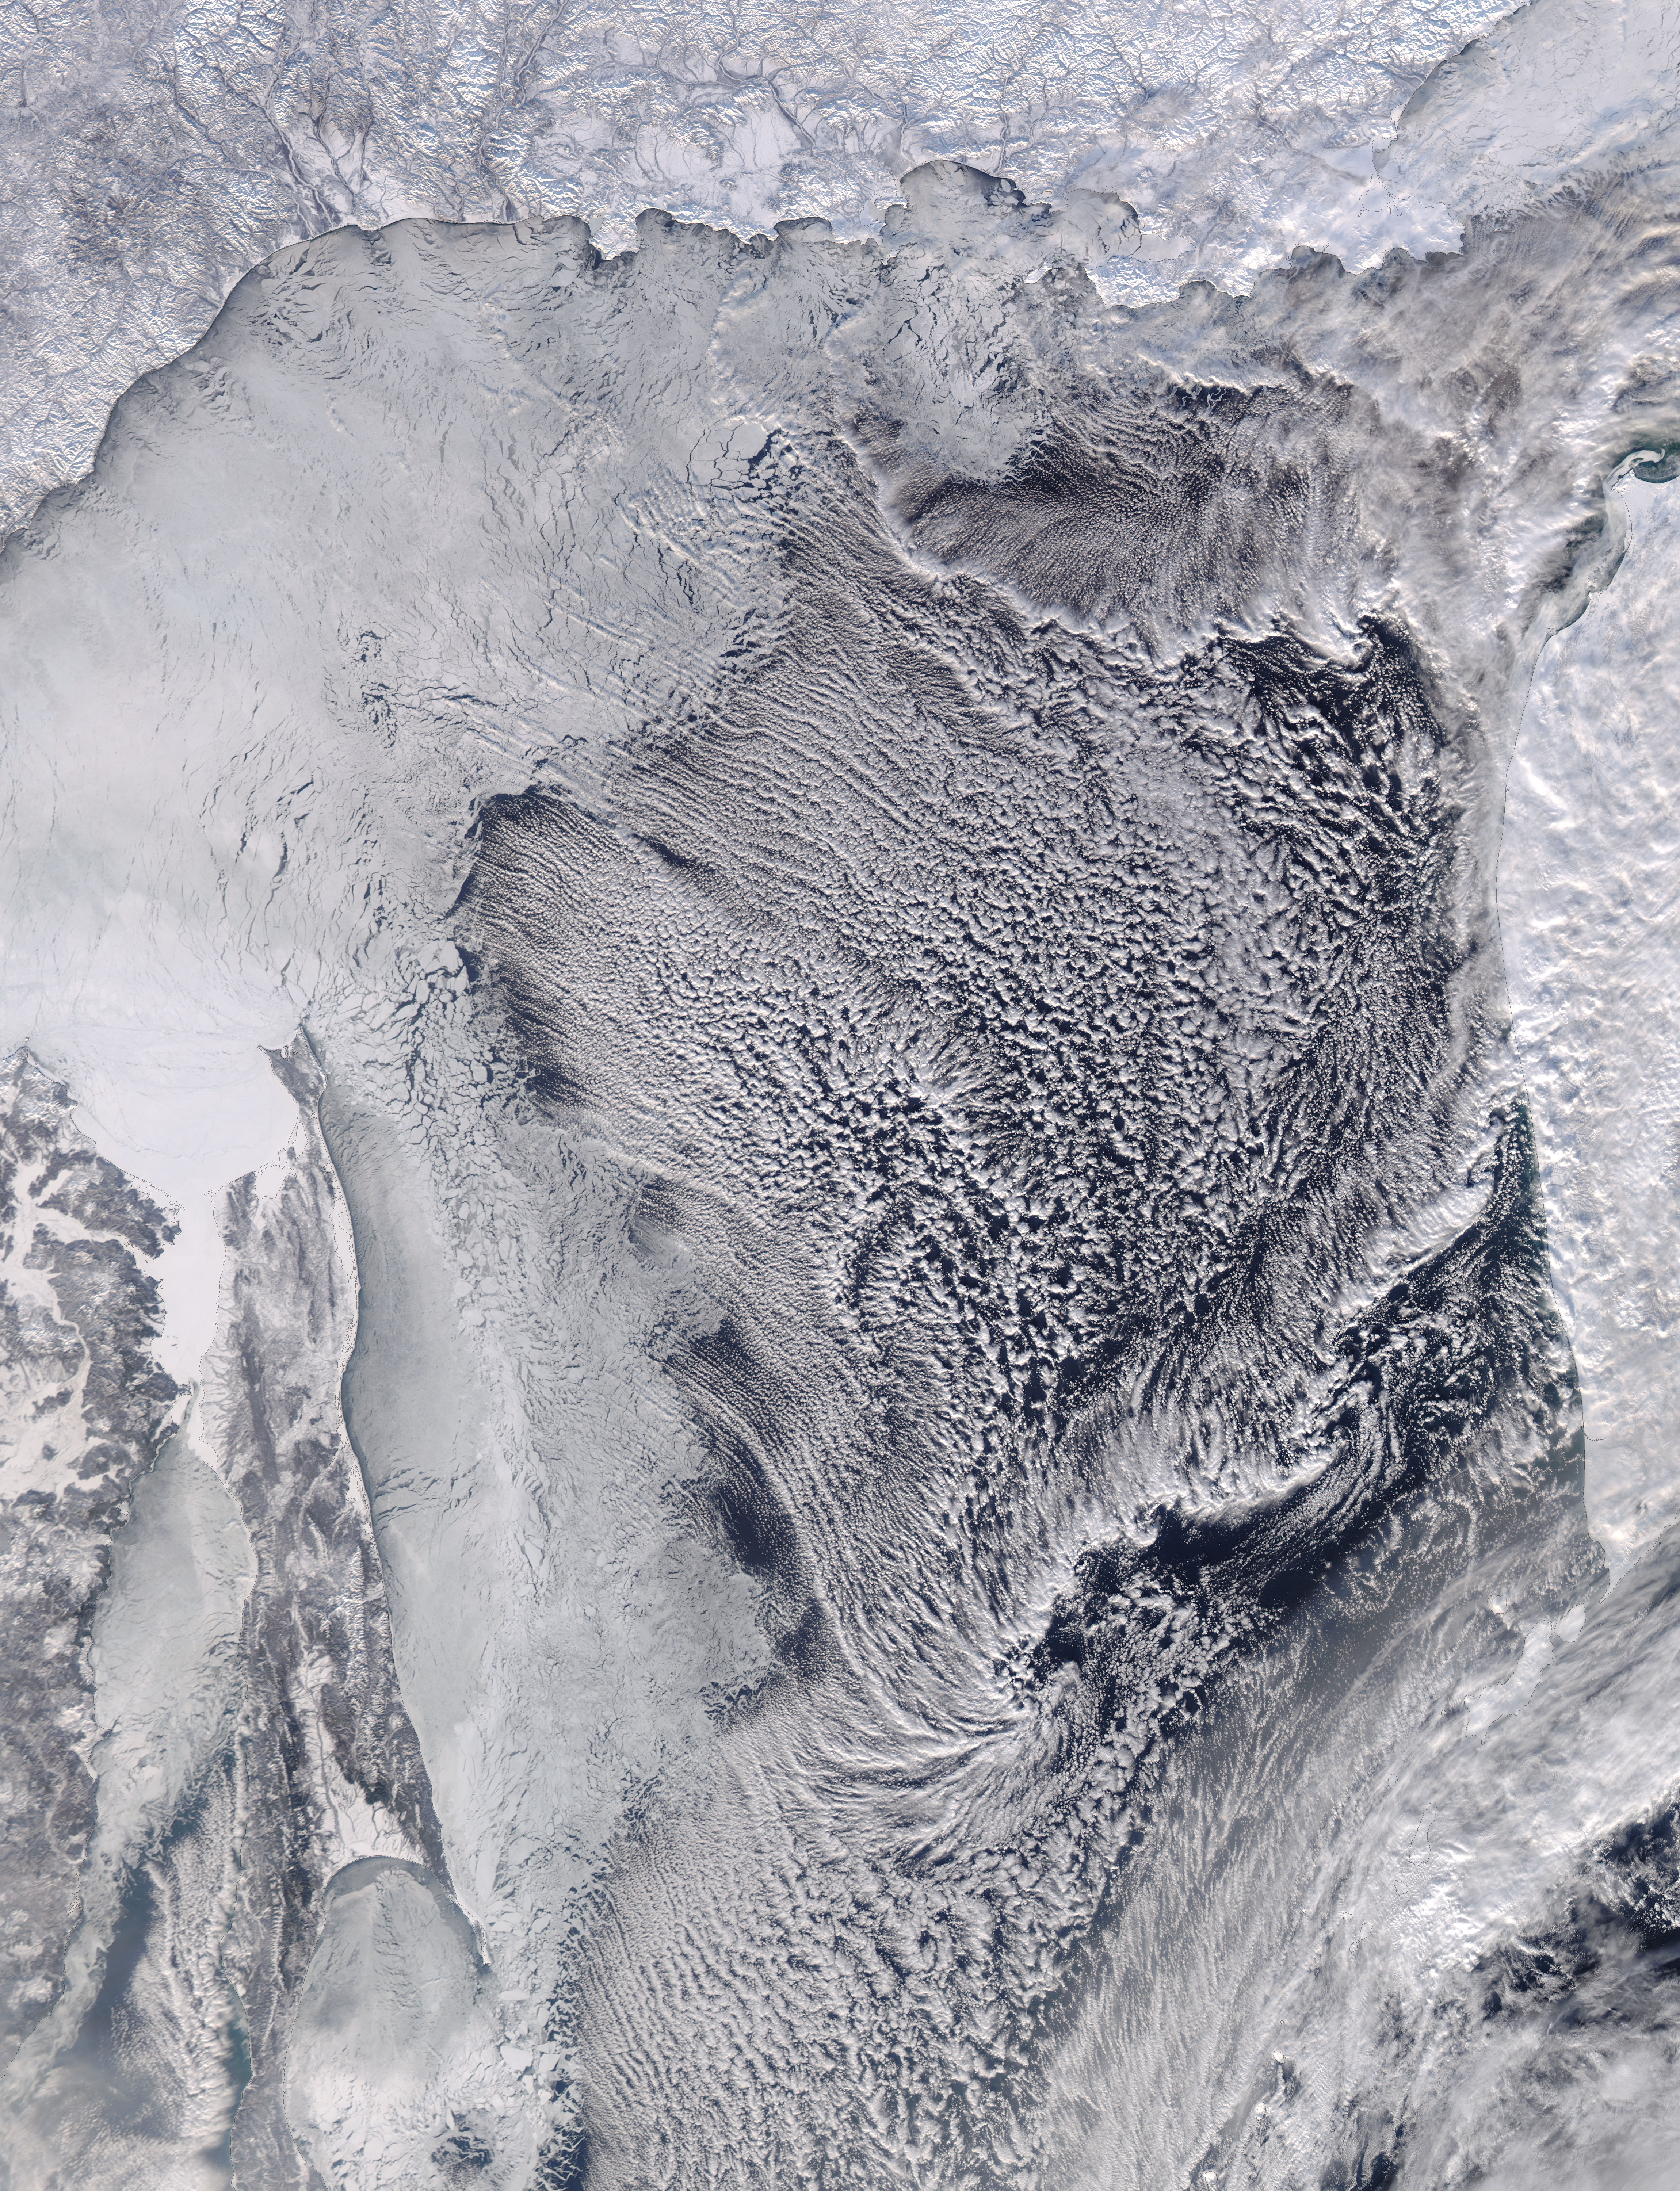 Cloud streets in the Sea of Okhotsk - related image preview